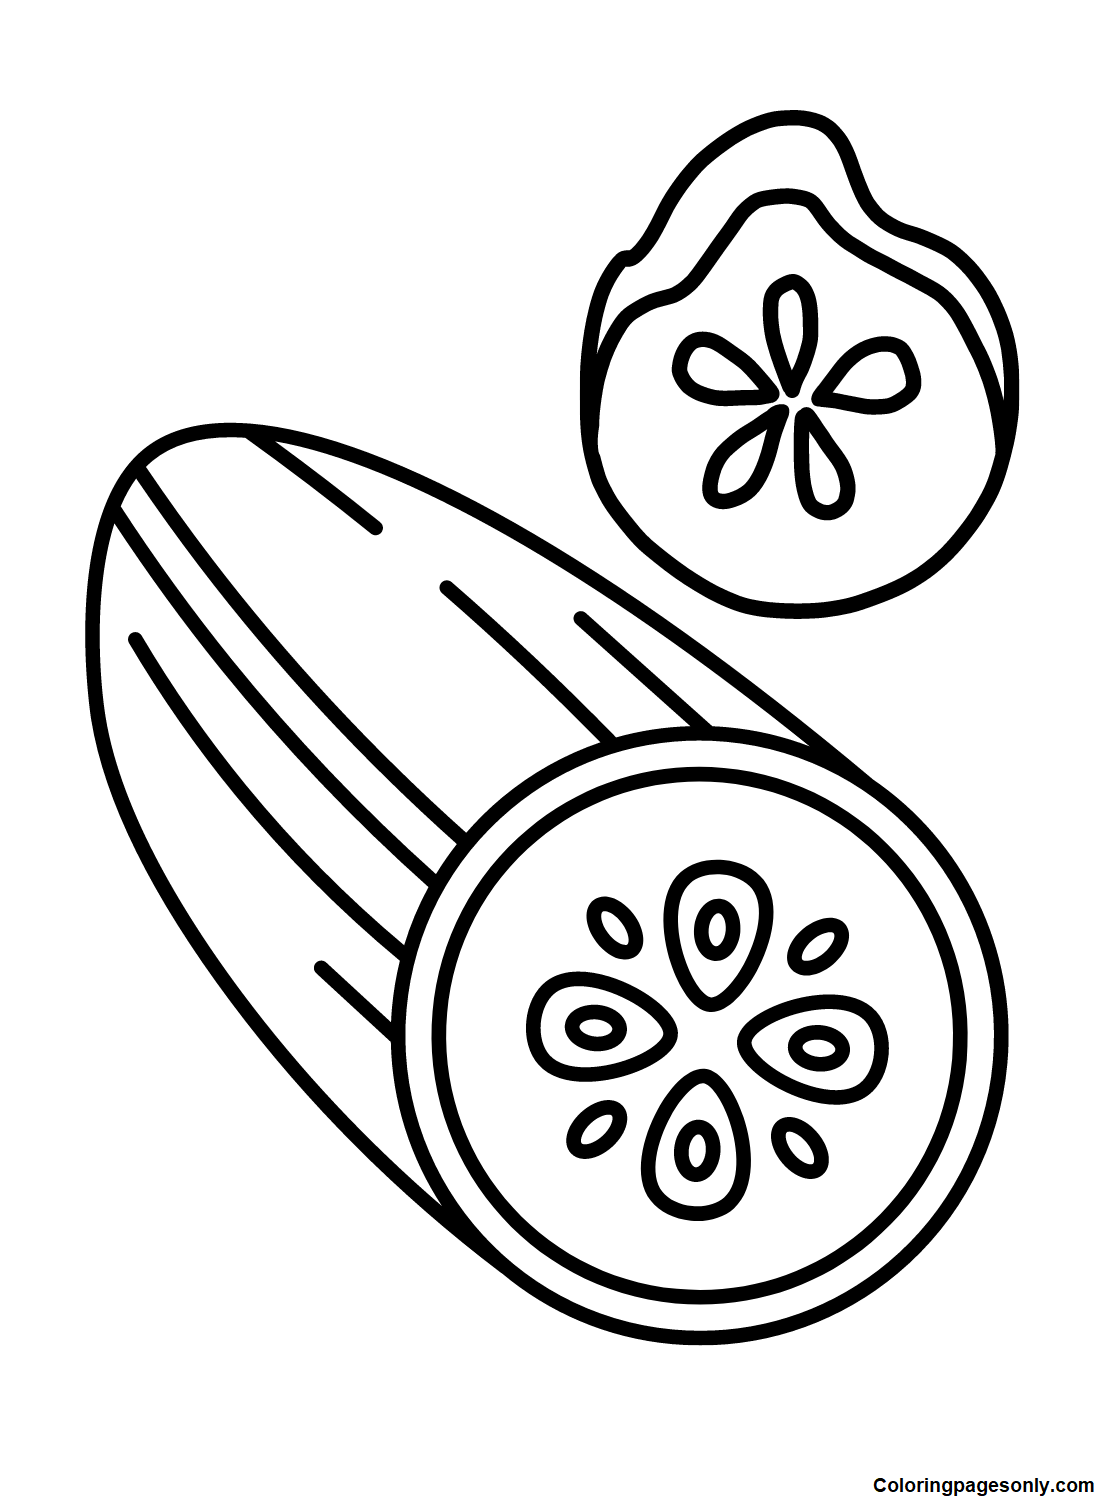 Cucumber color Sheets Coloring Page